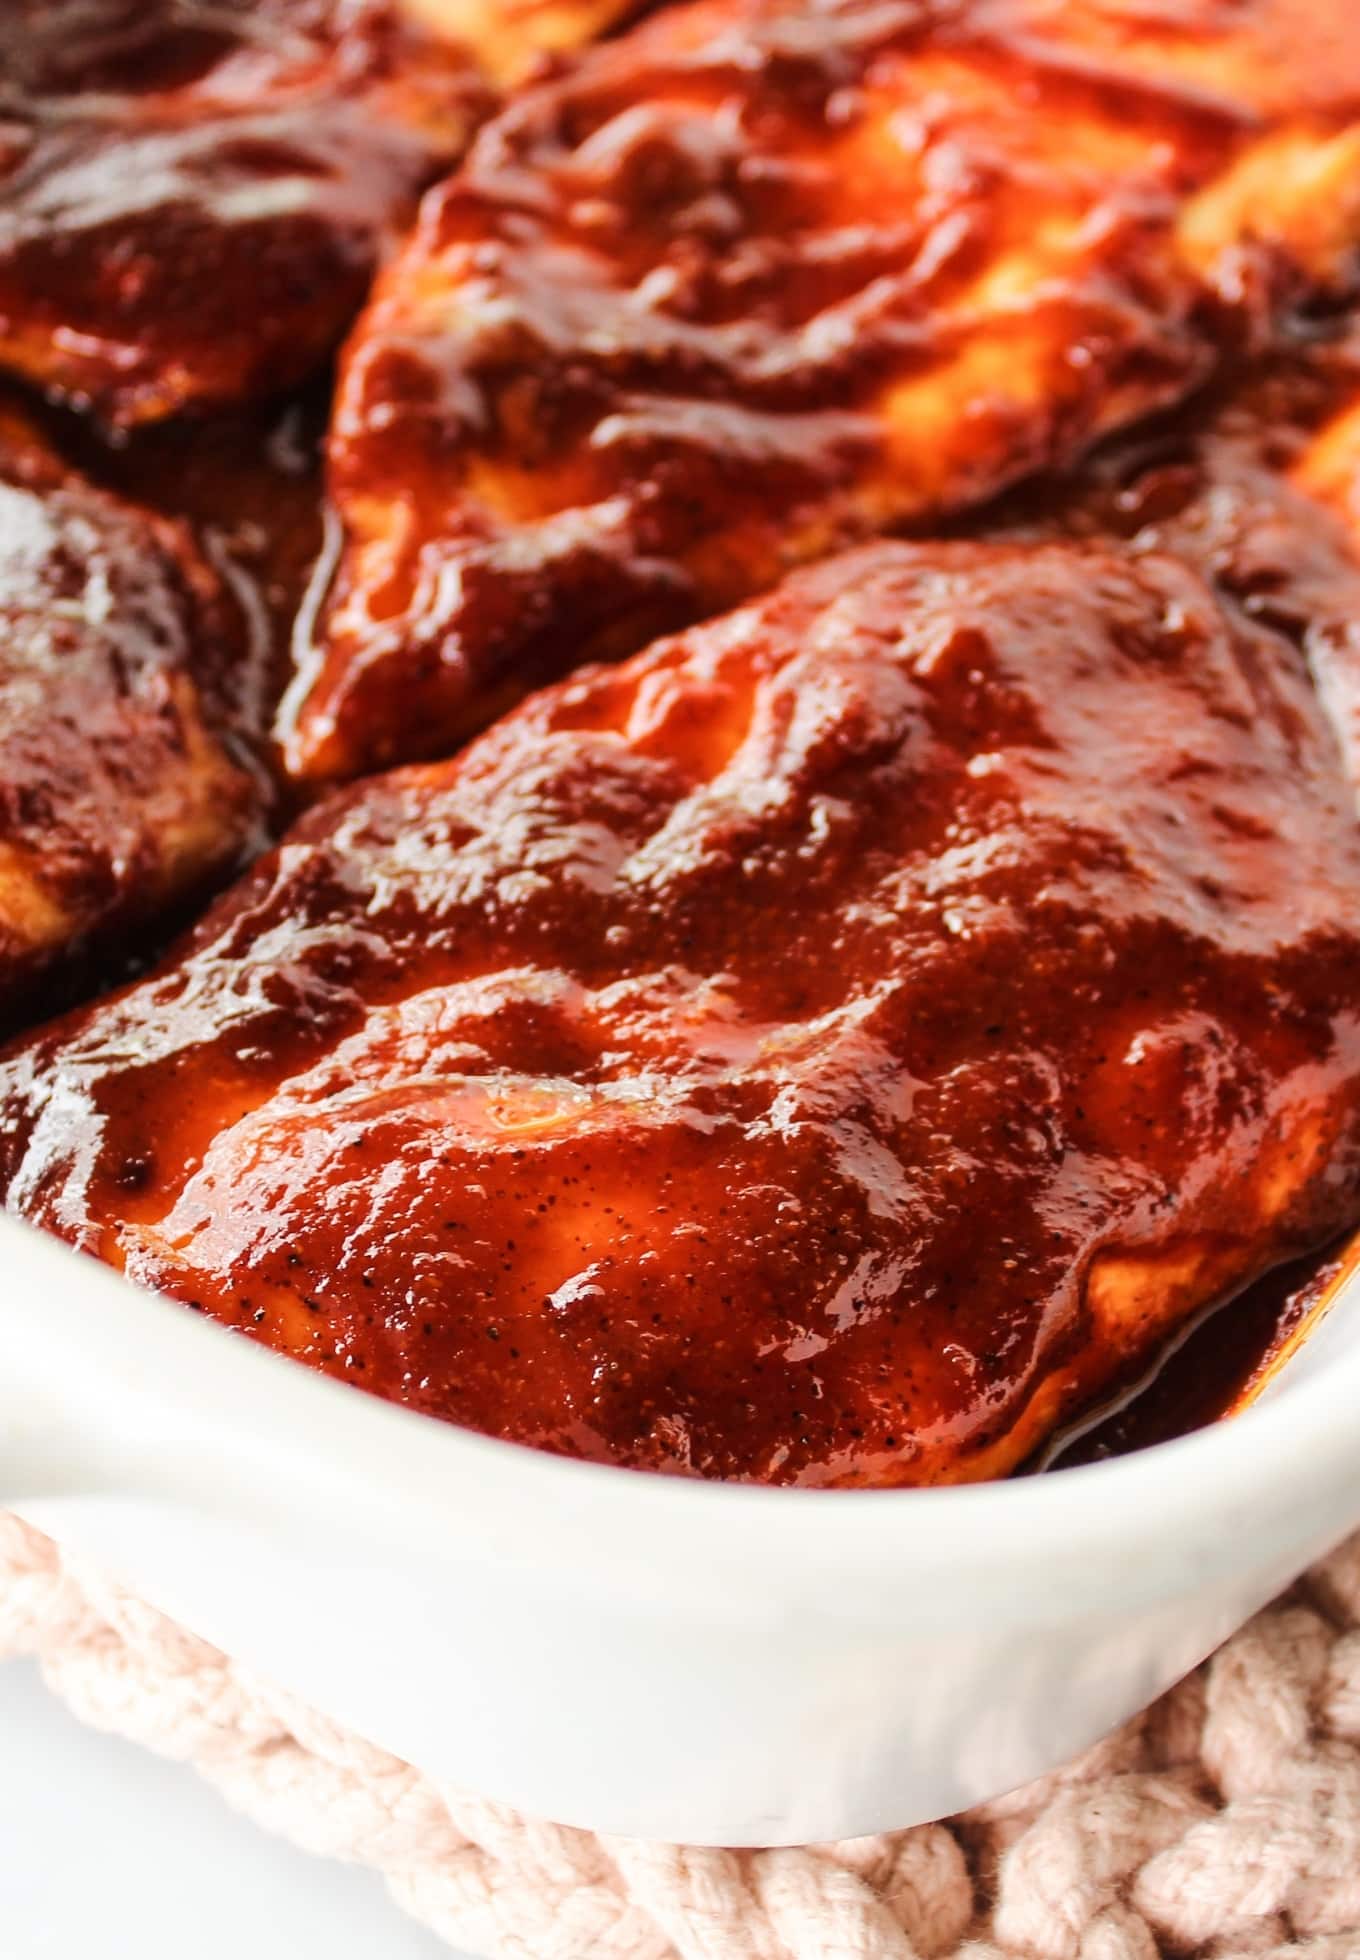 https://thewholecook.com/wp-content/uploads/2021/04/Oven-Baked-BBQ-Chicken-by-The-Whole-Cook-vertical1.jpg